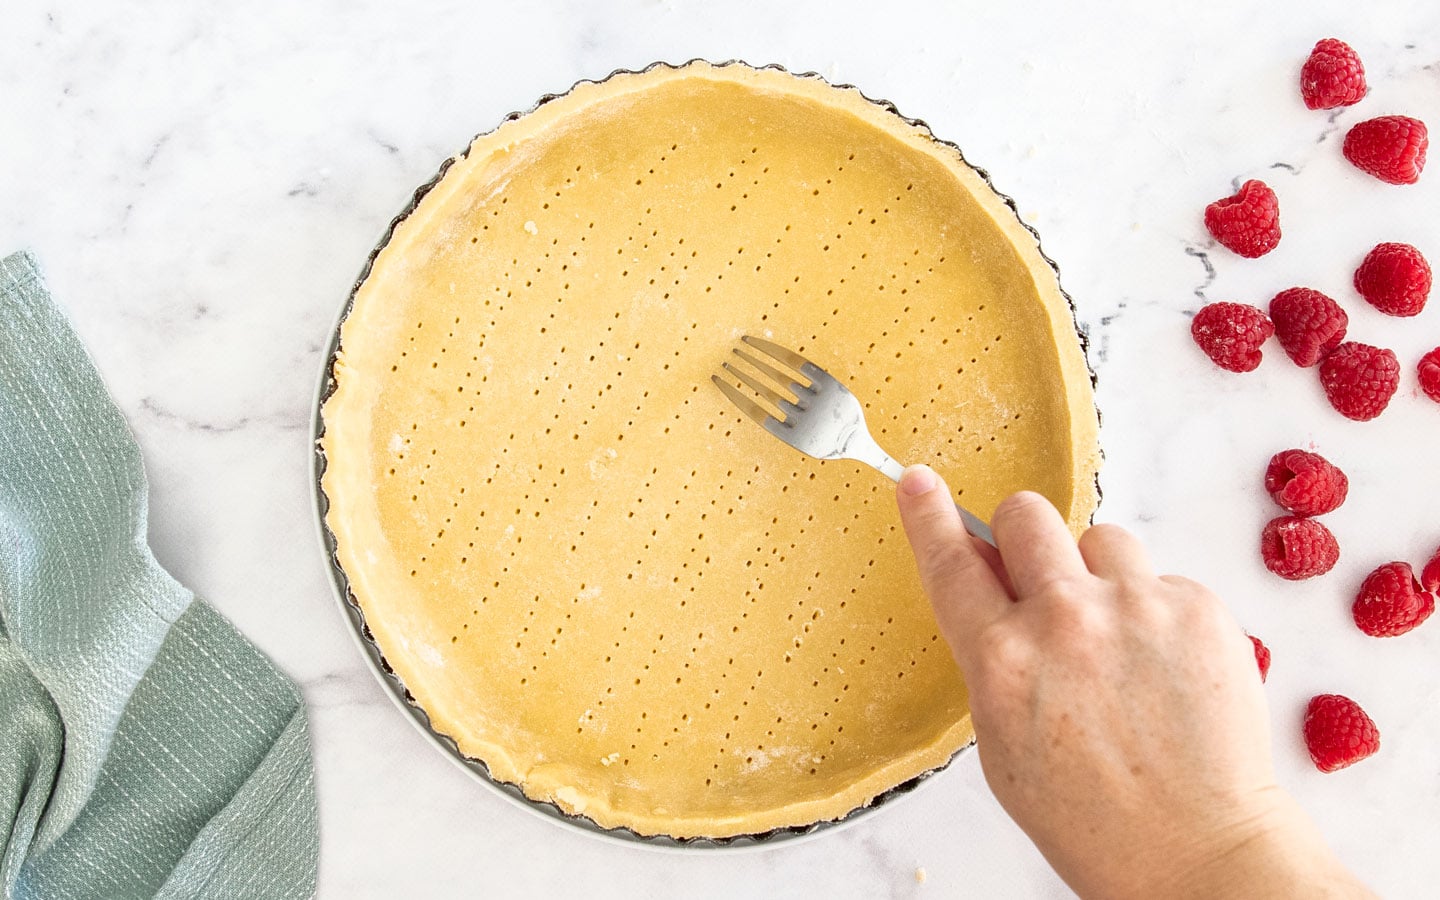 Docking the base of the tart shell with a fork.